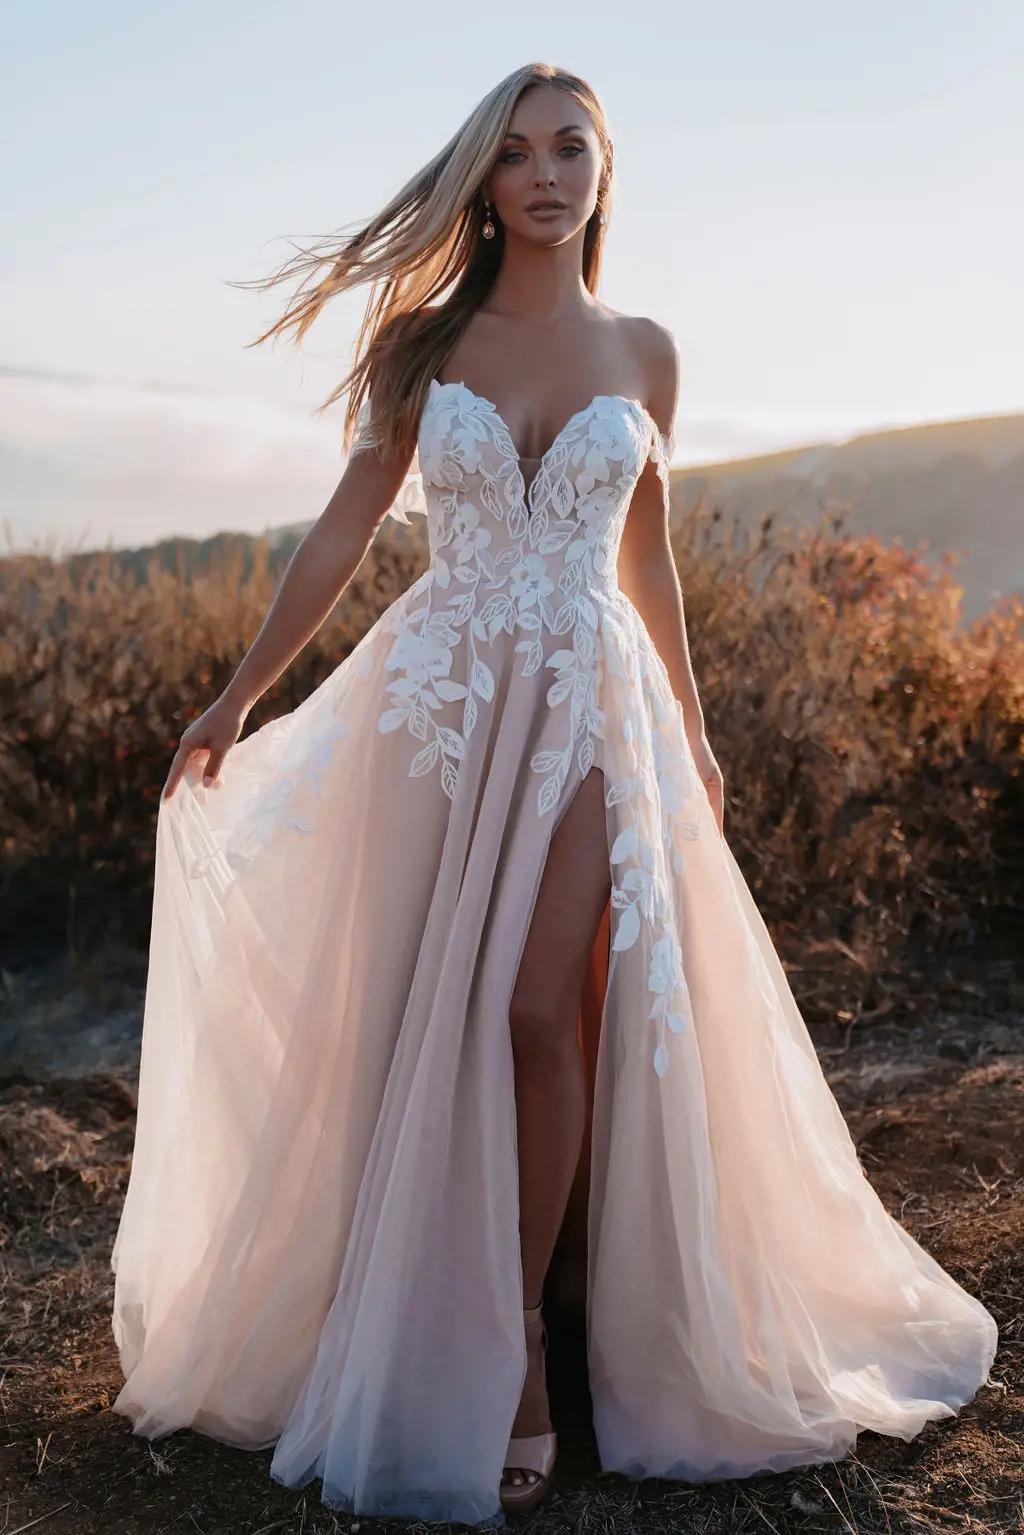 Buy High Quality Wedding Dresses - All Within Your Budget. Desktop Image